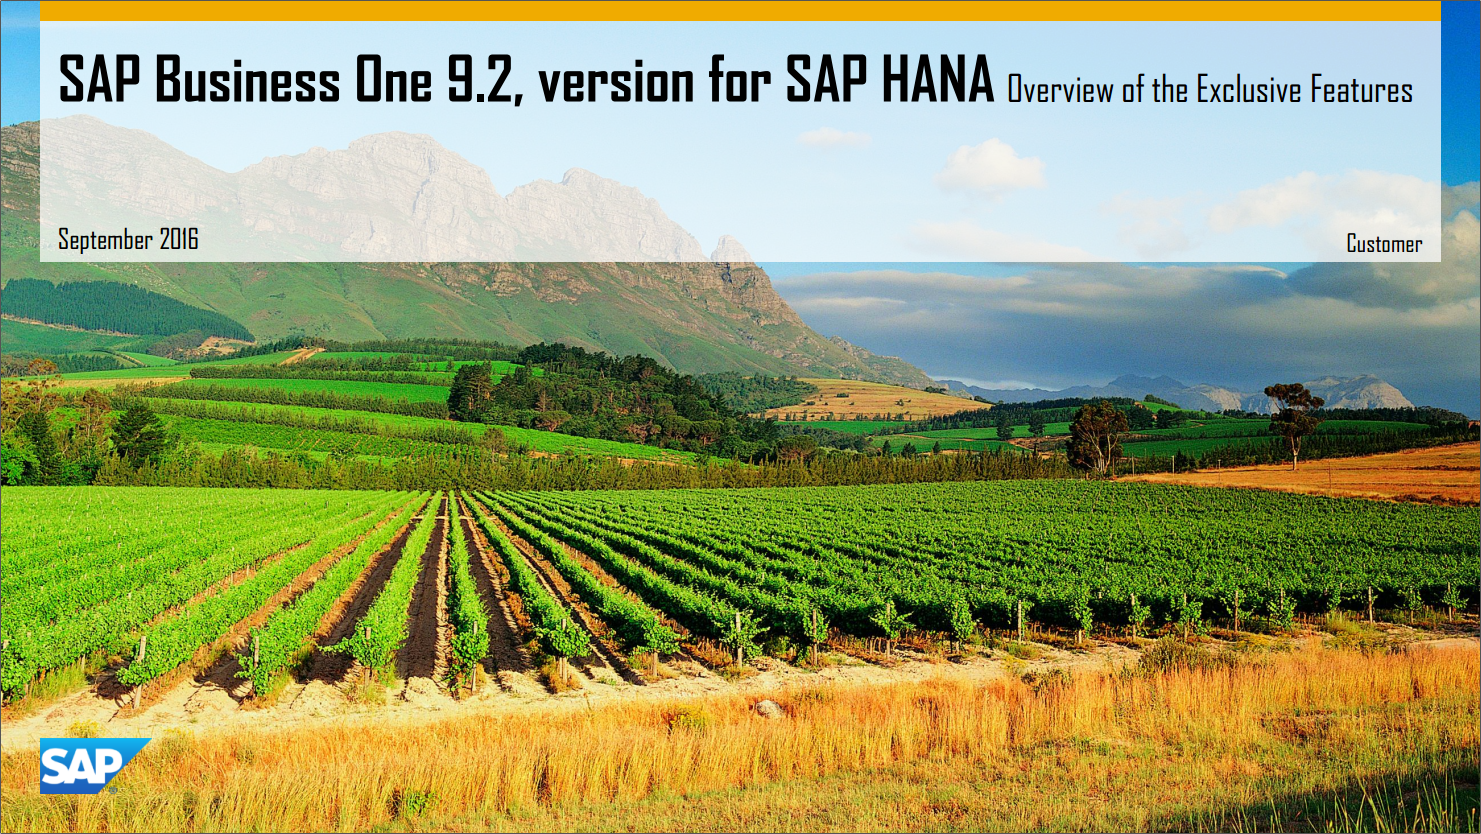 SAP Business One on Hana 9.2 Exclusive Features